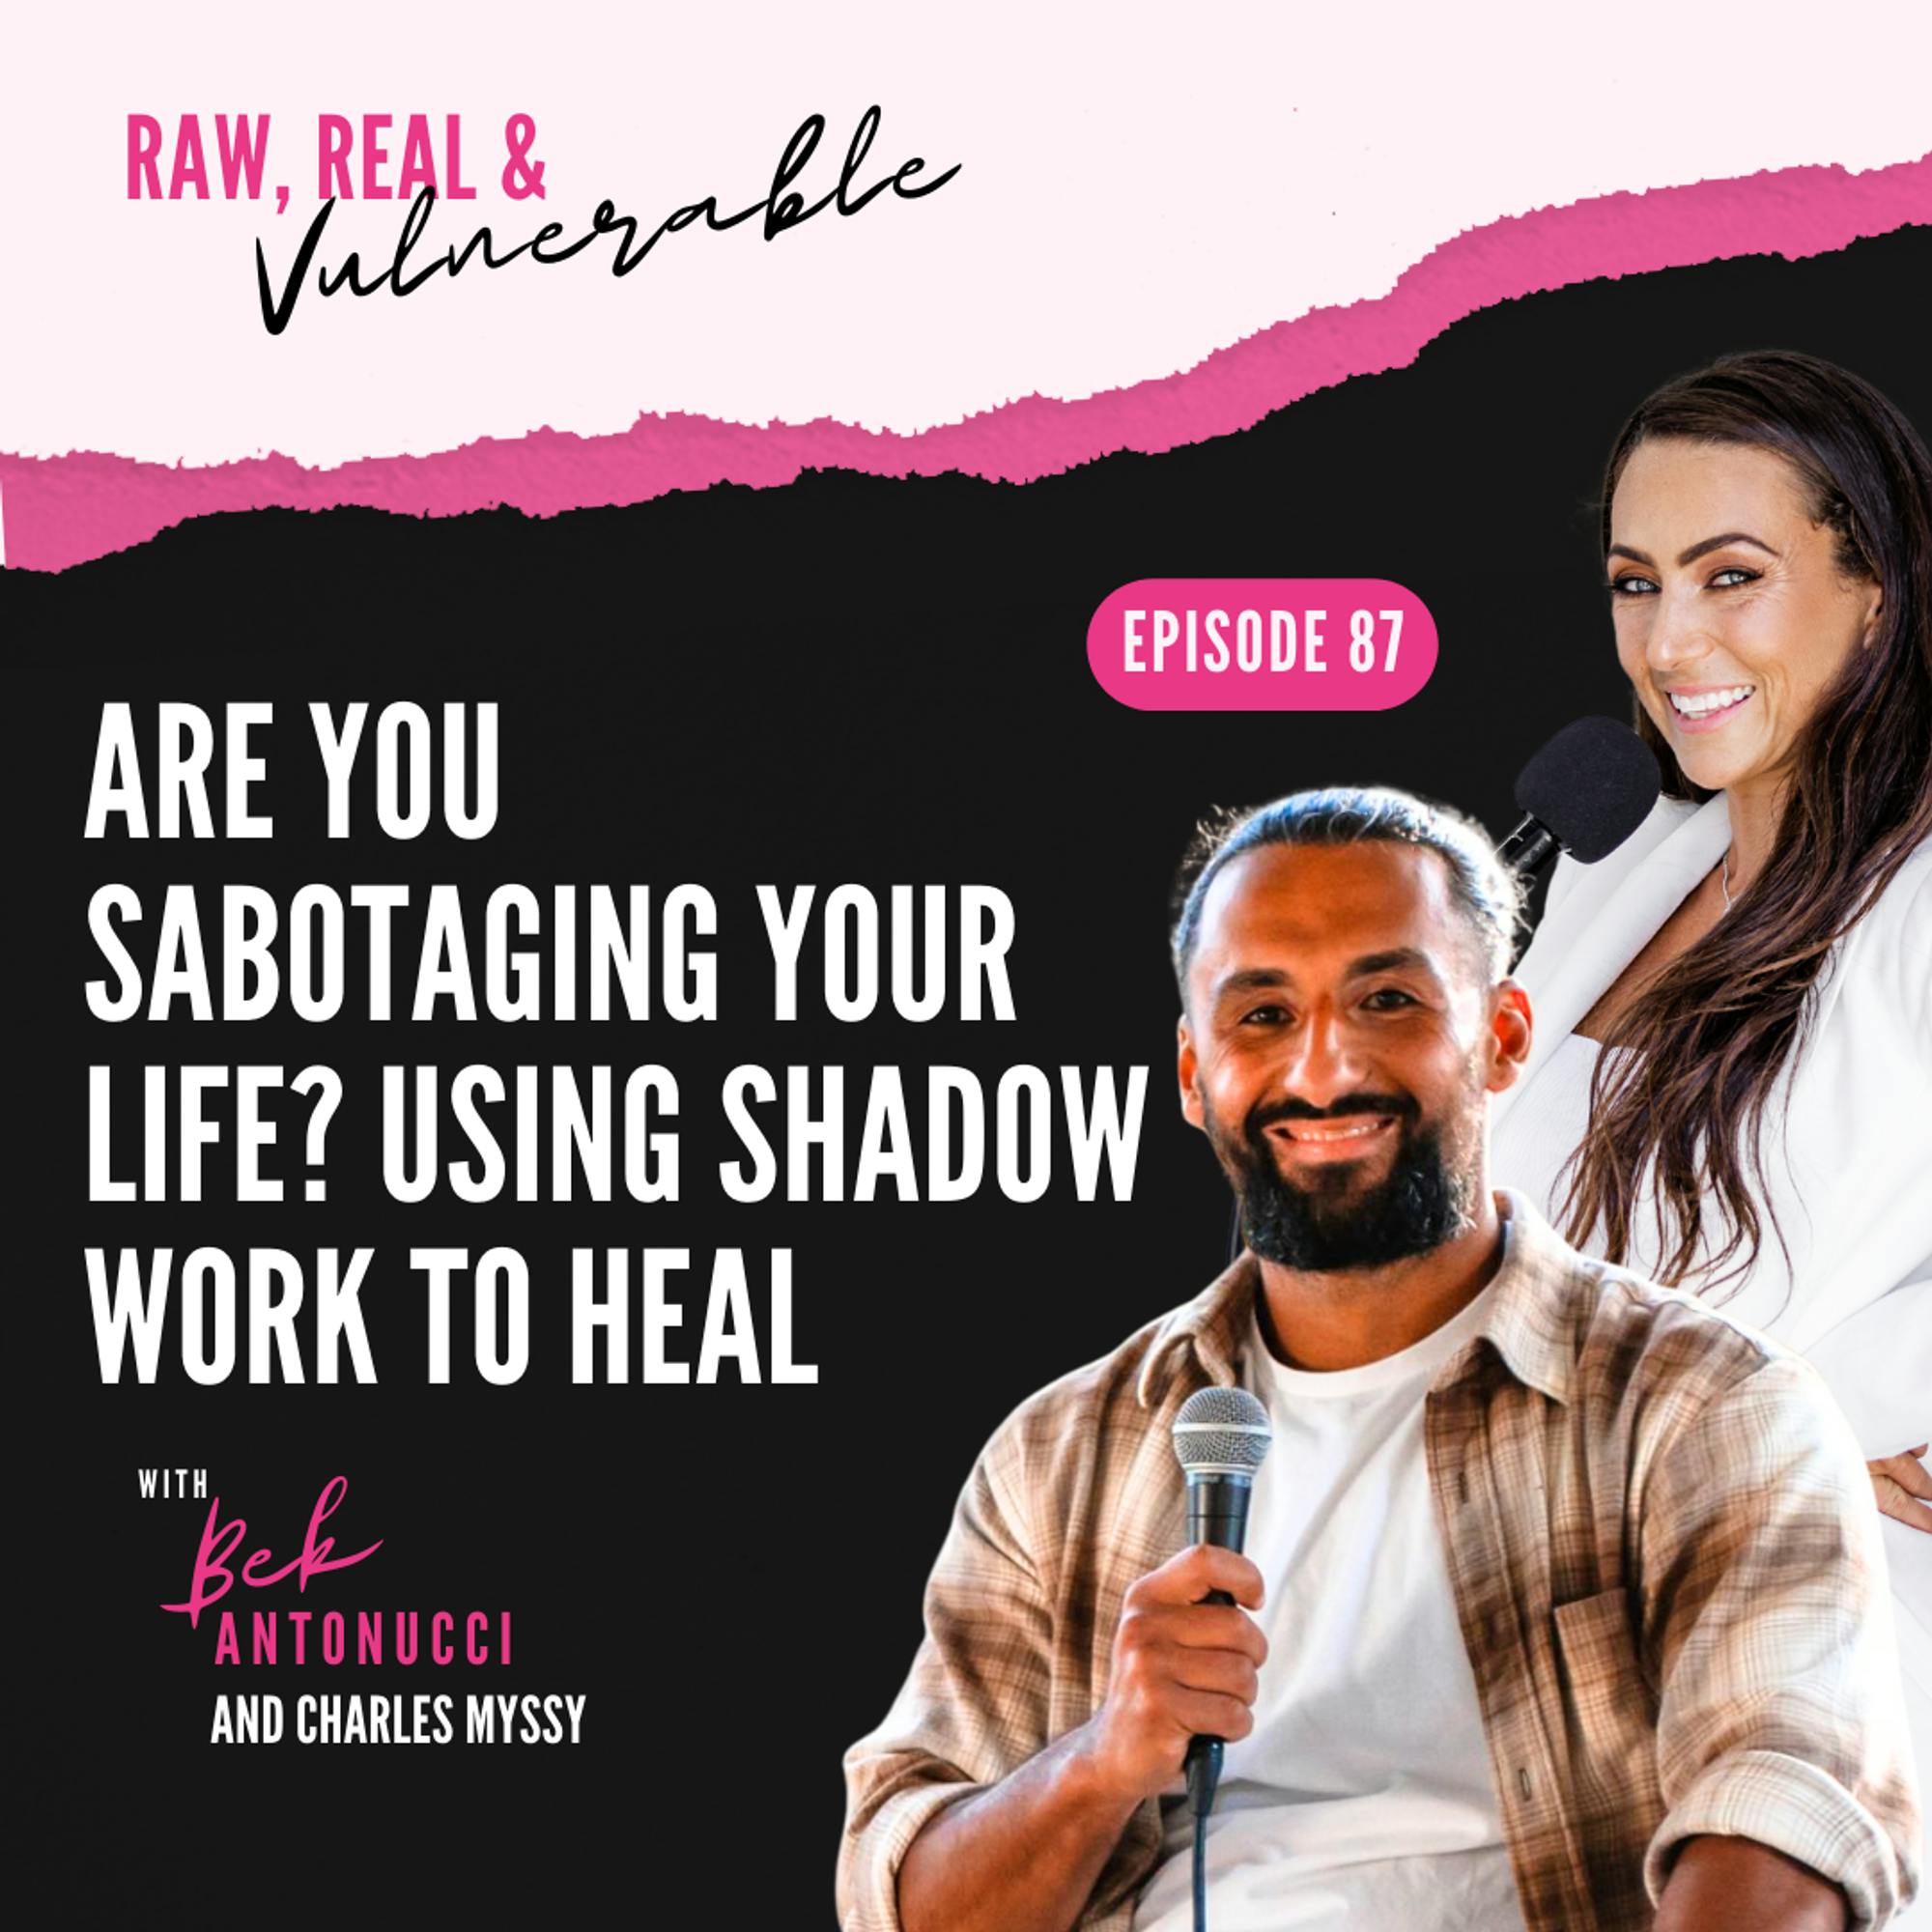 Are You Sabotaging Your Life? Using Shadow Work to Heal with Charles Myssy